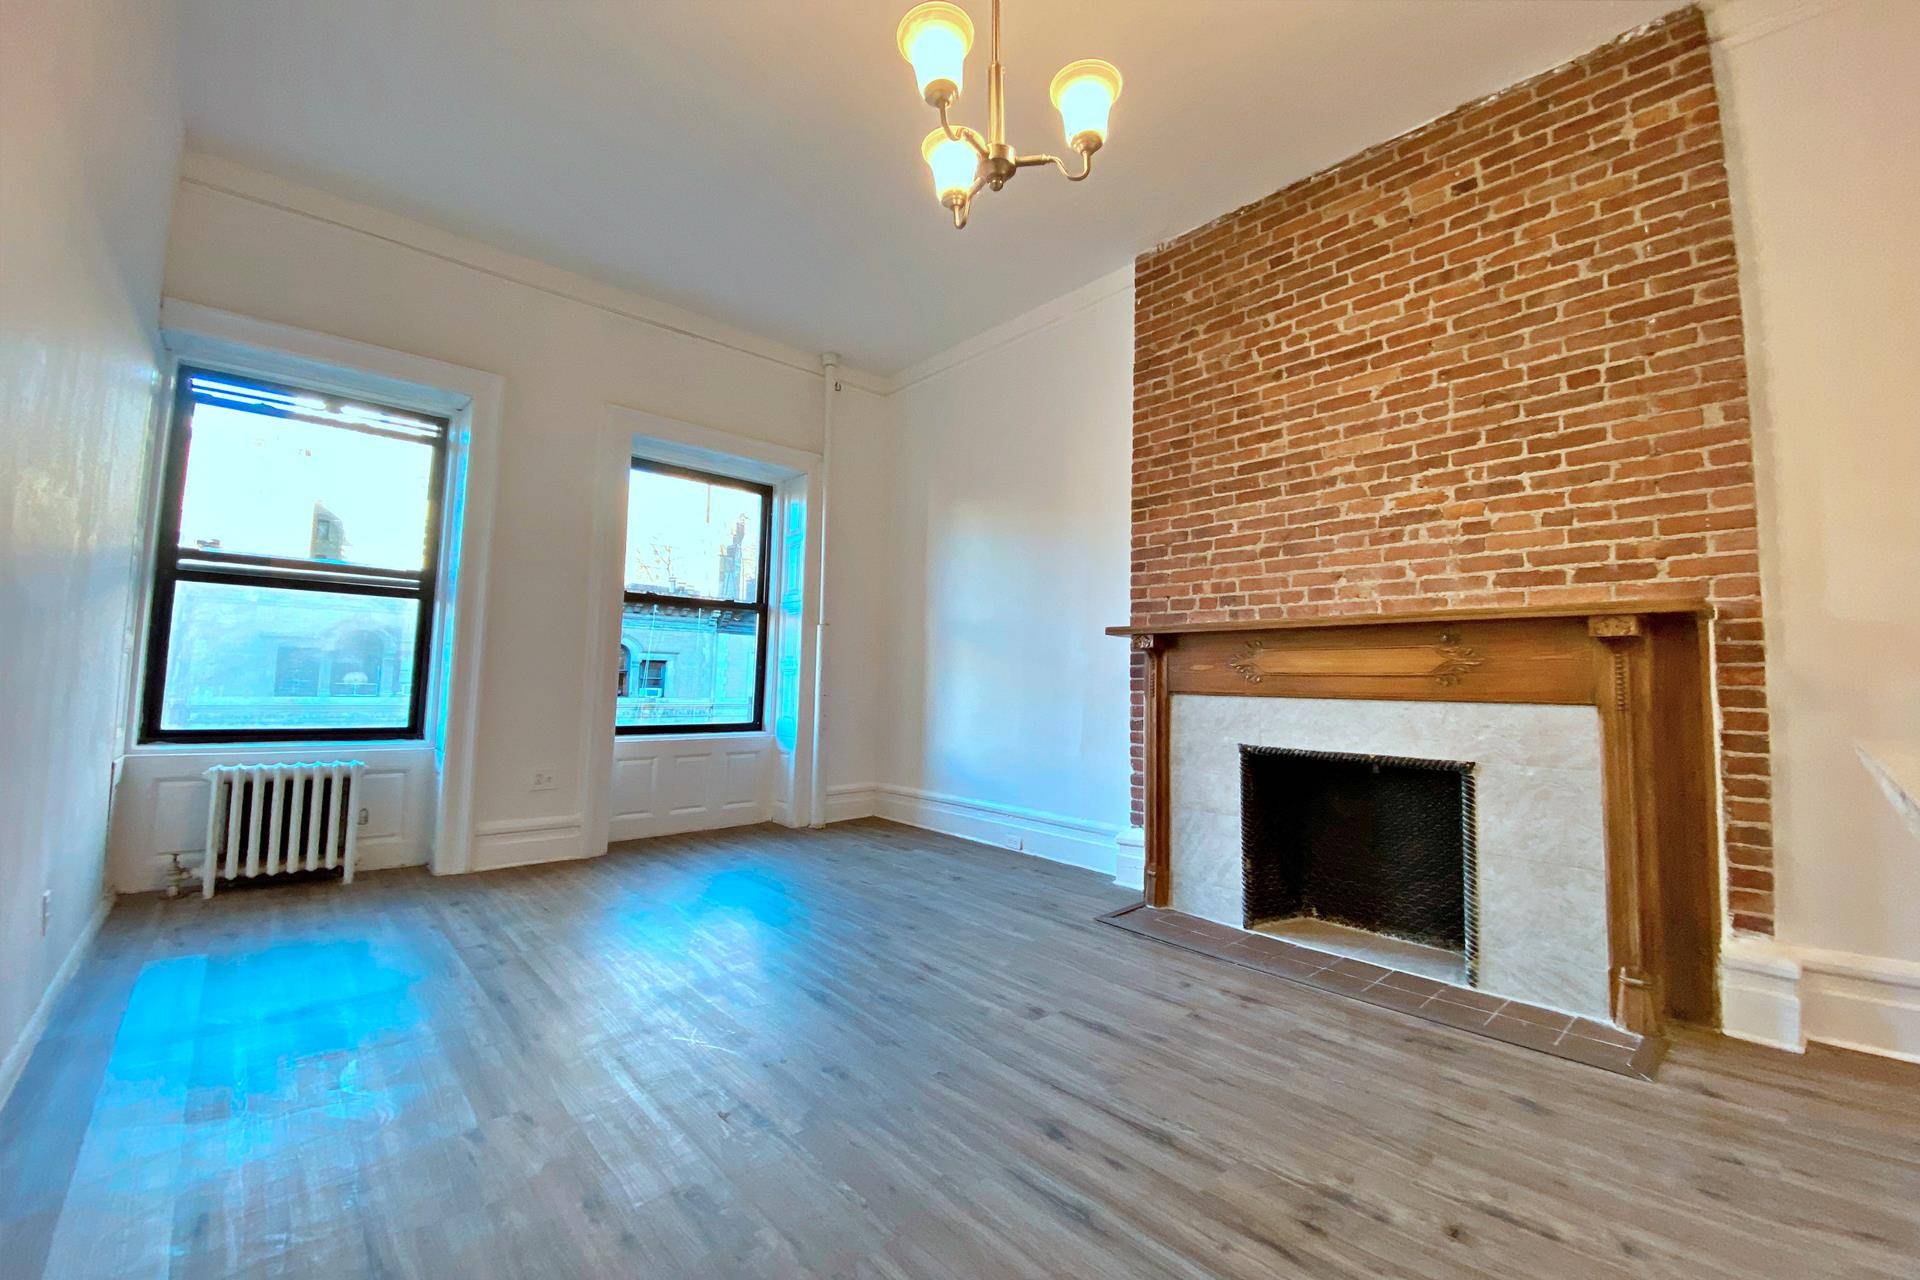 ALL INQUIRIES VIA WEBSITE OR EMAIL ONLY, PLEASEFor an immediate start date 16 month termBeautiful loft like one bedroom on West 69th Street near Central Park West.